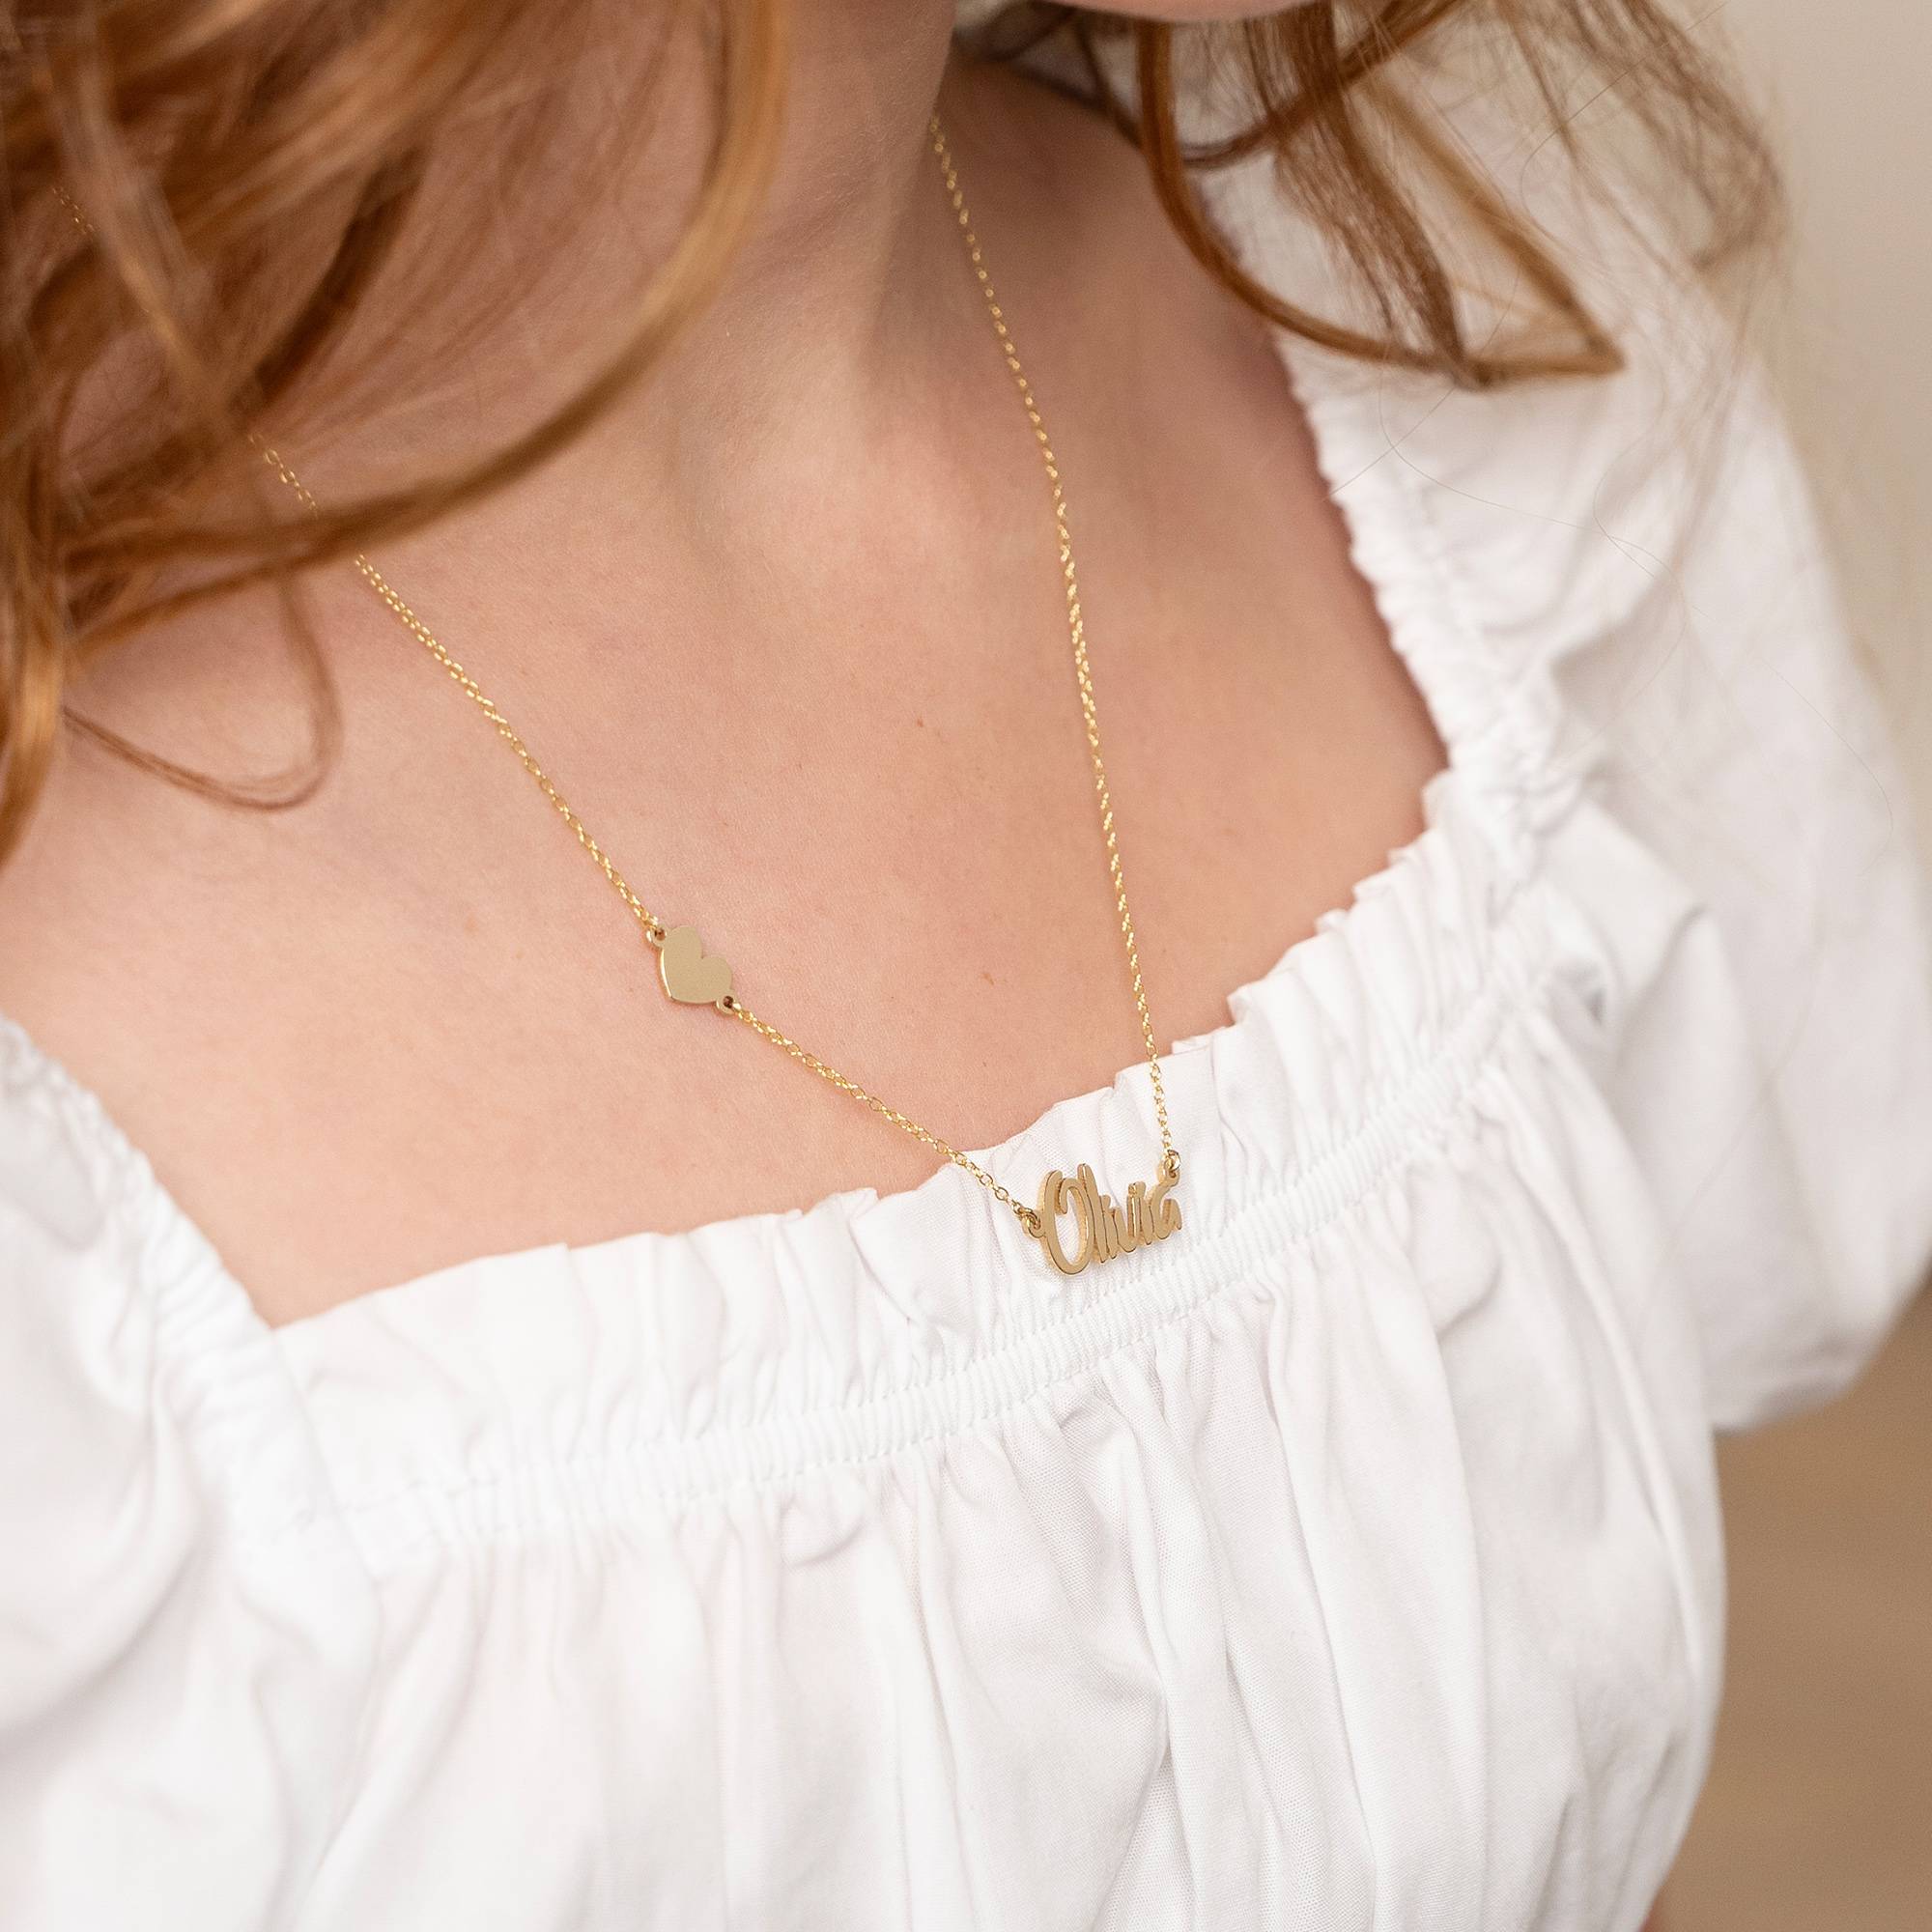 Charlotte Symbol Name Necklace in 14K Yellow Gold-1 product photo